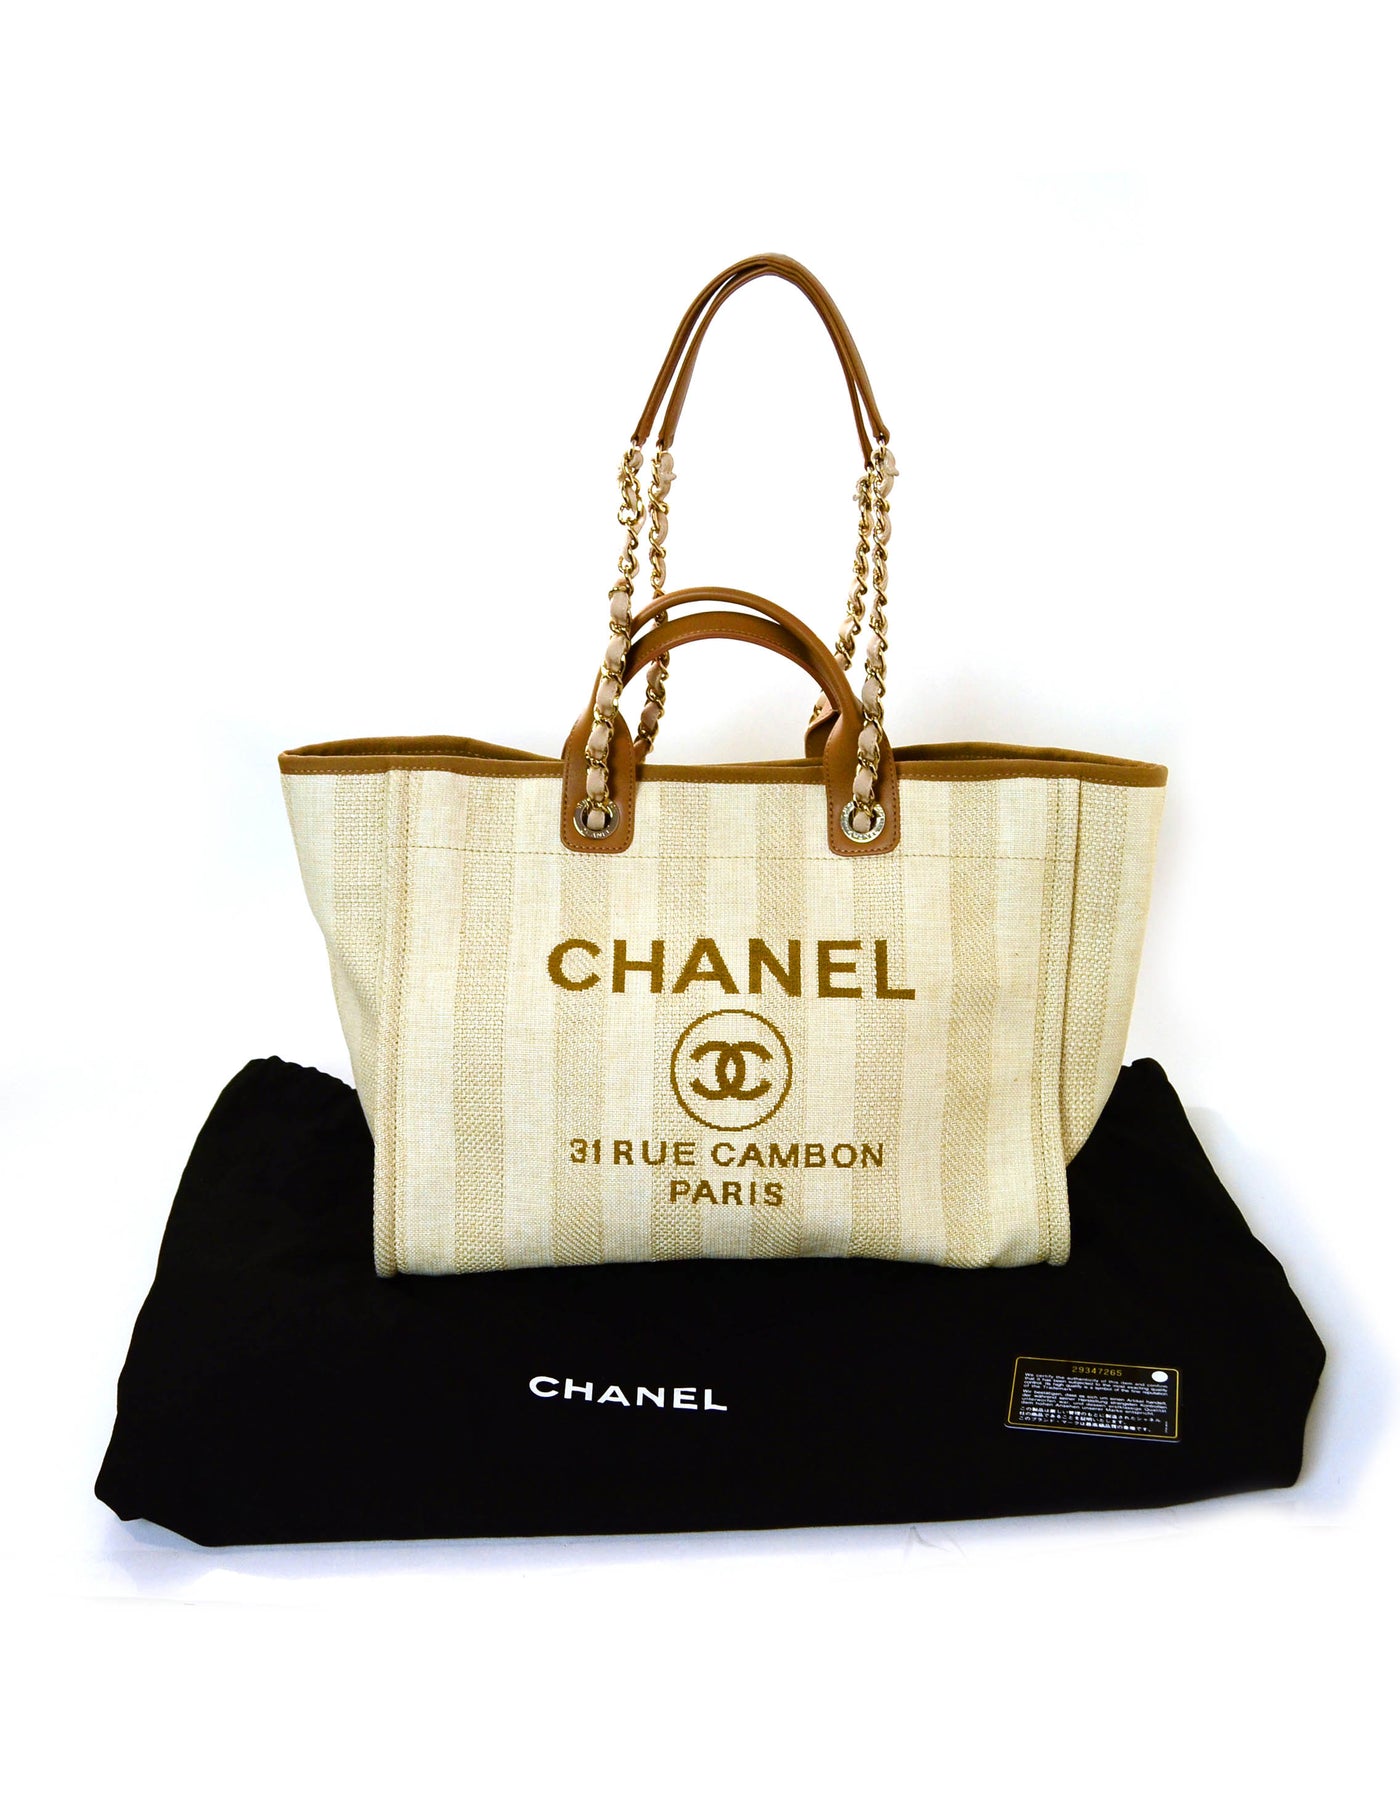 Chanel NEW 2020 Black Mixed Fibers Large Deauville Tote Bag